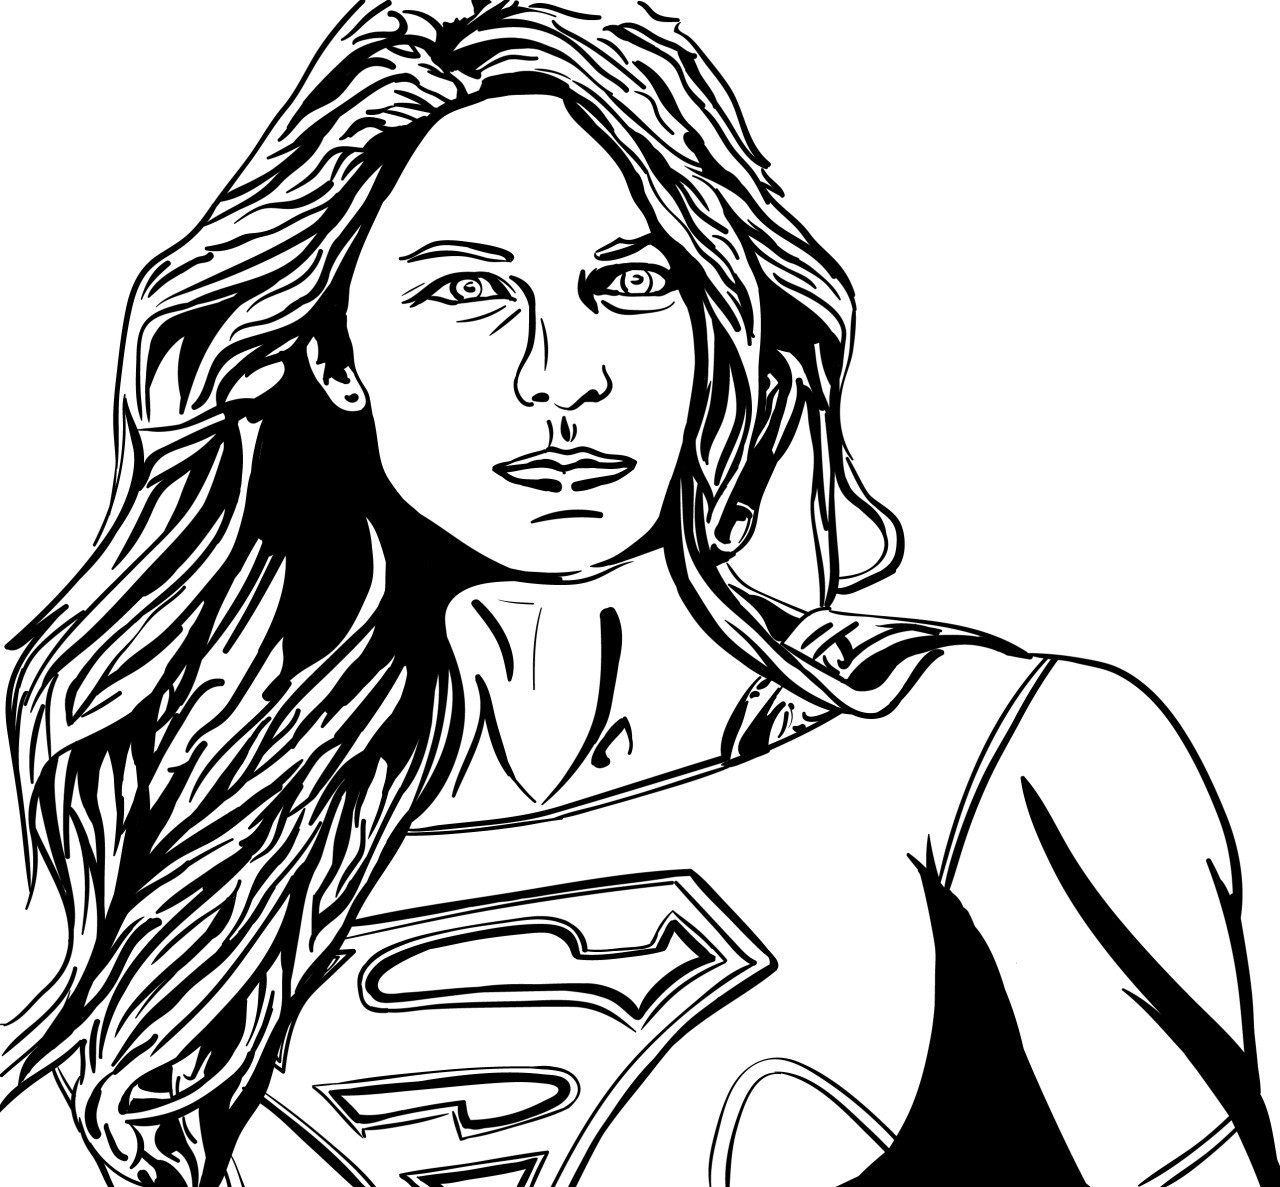 Coloring Pages Of Supergirl
 Supergirl Coloring Pages Best Coloring Pages For Kids